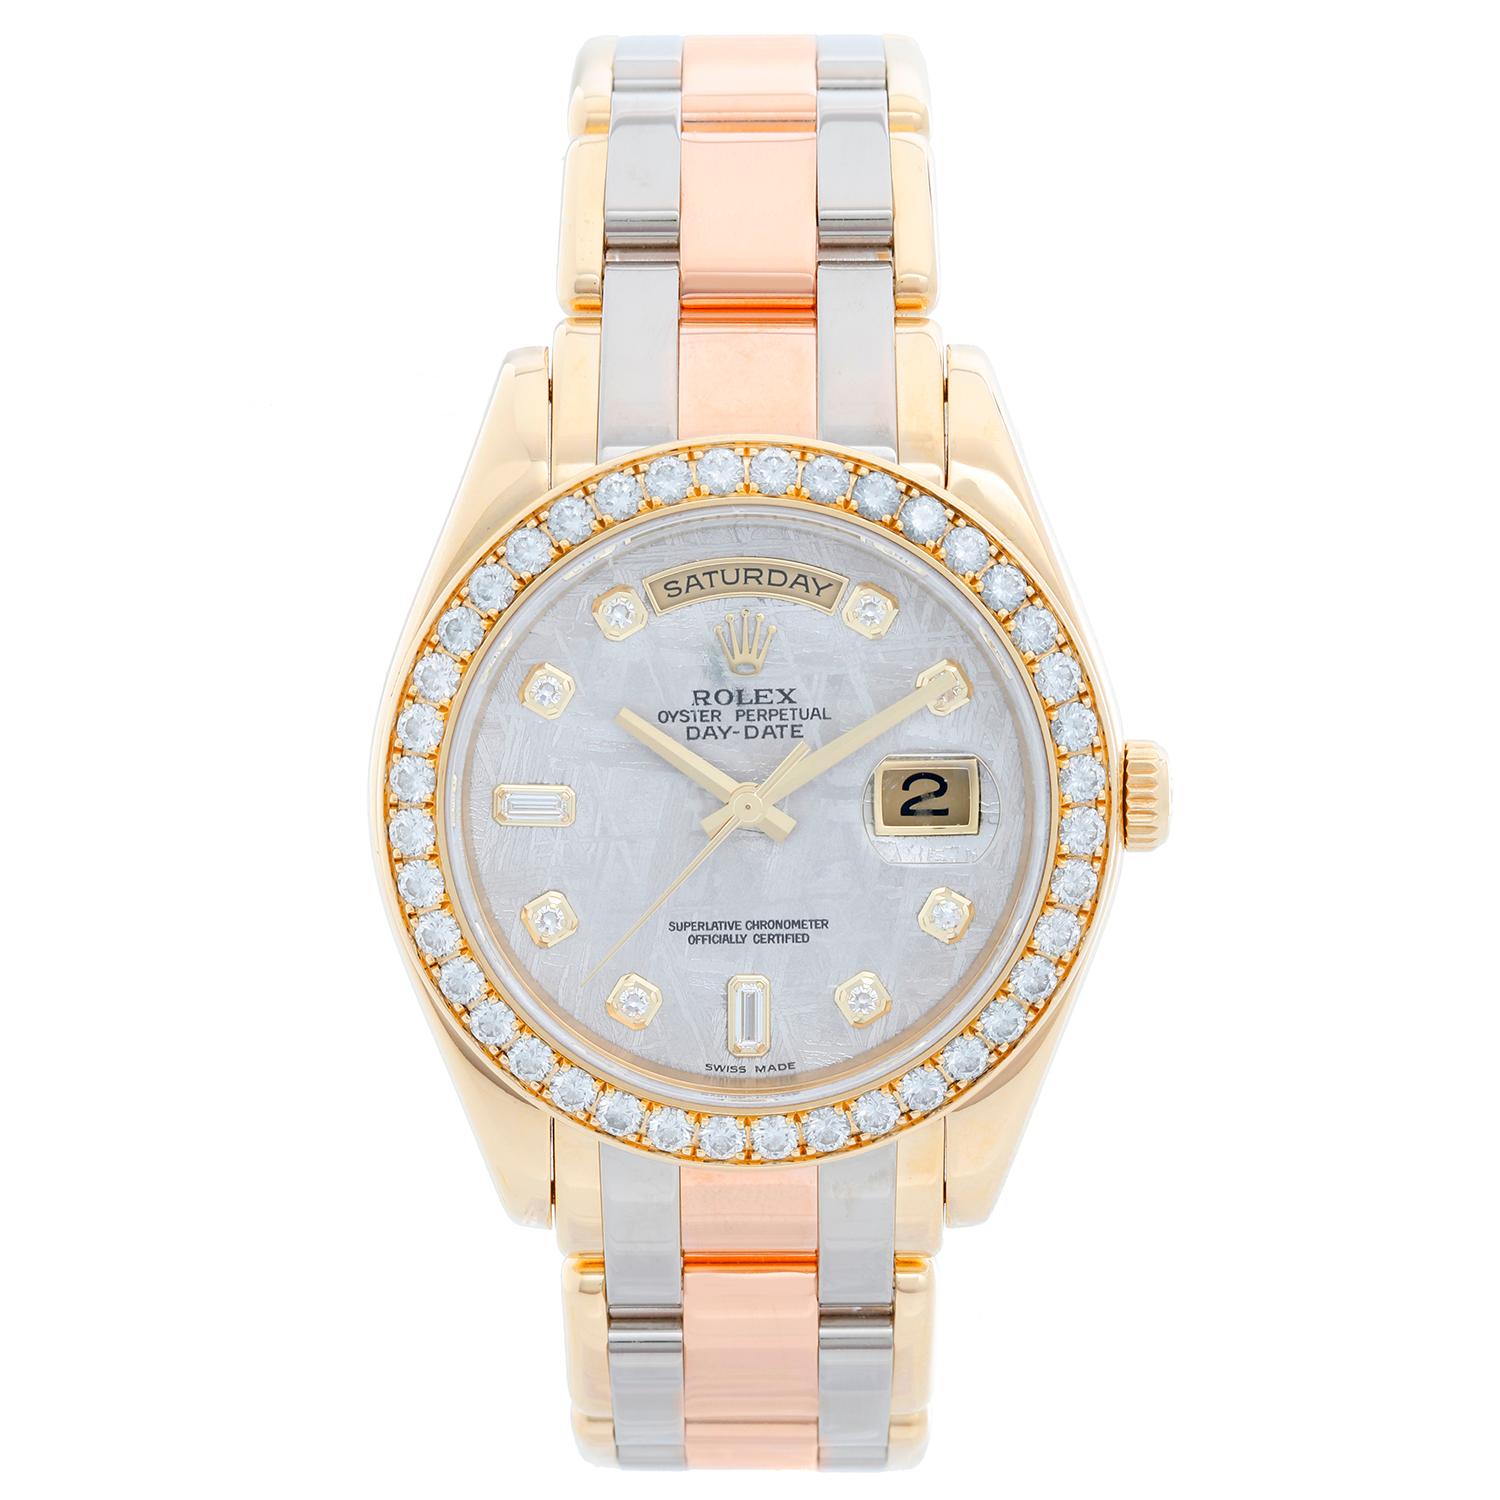 Automatic winding, 31 jewel, sapphire crystal. 18k yellow gold case with 40-diamond factory bezel (39mm diameter). Factory meteorite diamond dial. 18k yellow, white and rose/pink gold Tridor Masterpiece bracelet. Pre-owned with Rolex box and books.